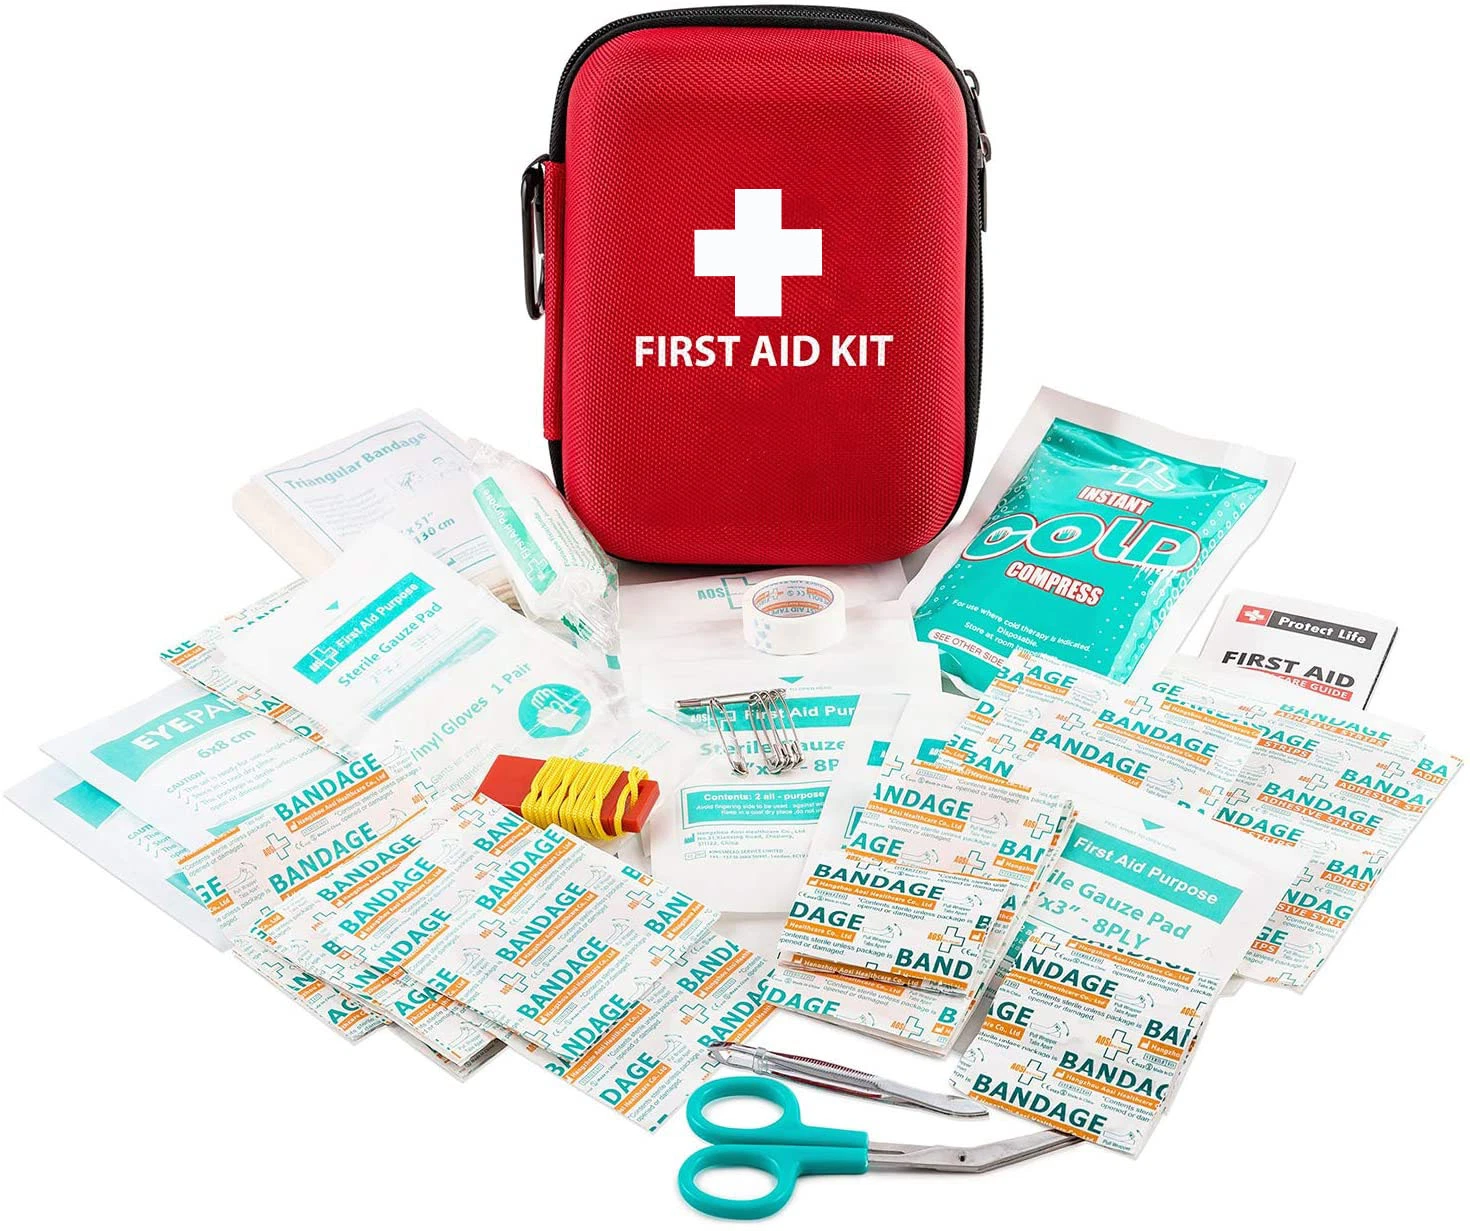 First-Aid Kit for Resuscitation General First-Aid Kit Bag